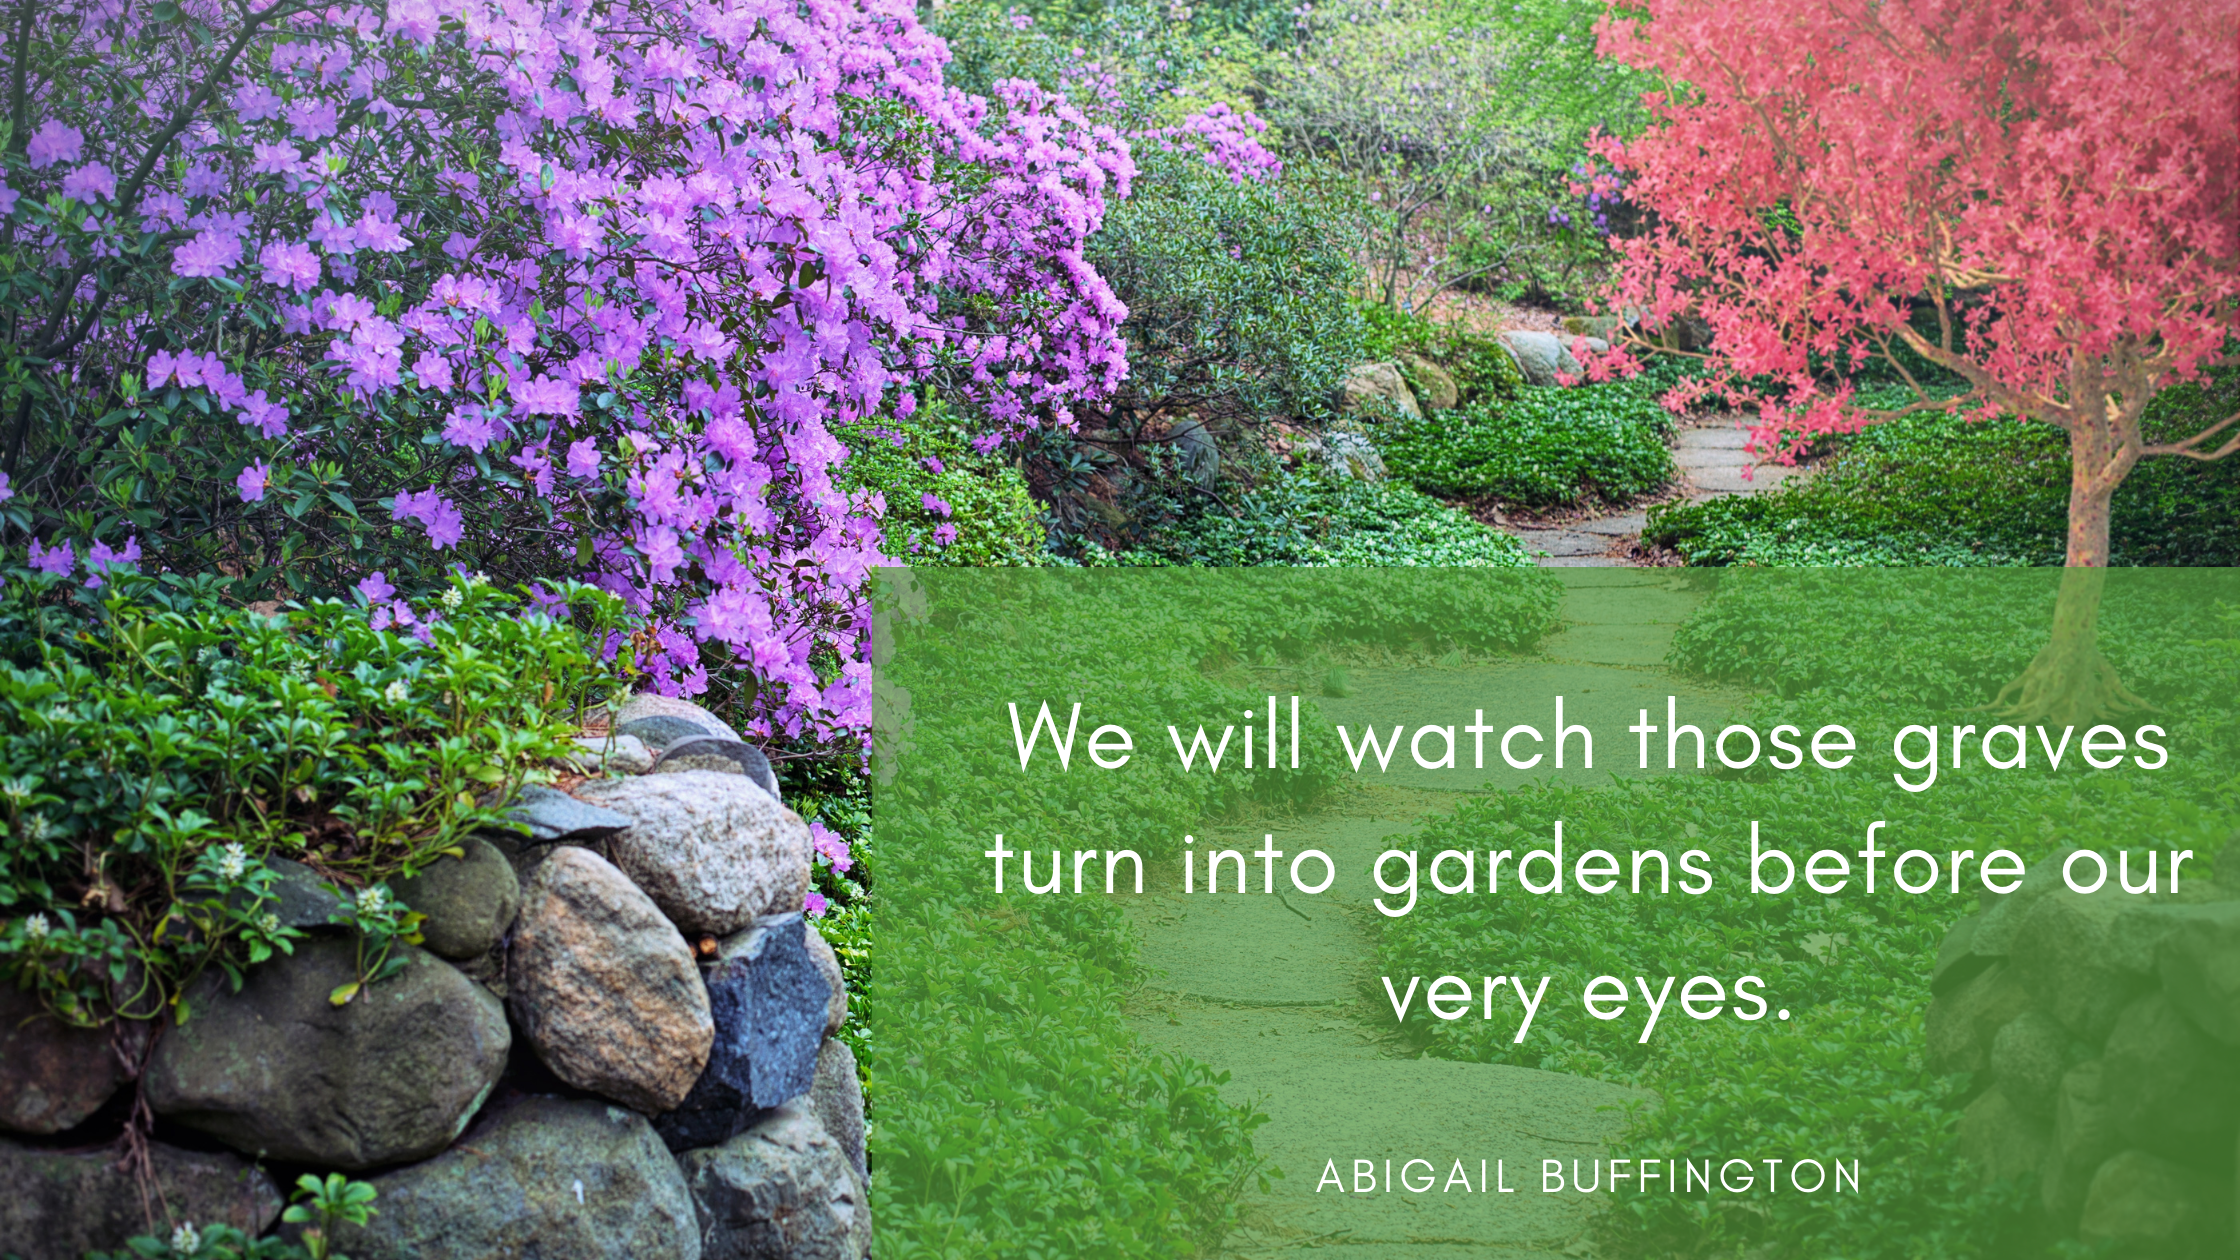 We will watch those graves turn into gardens before our very eyes.